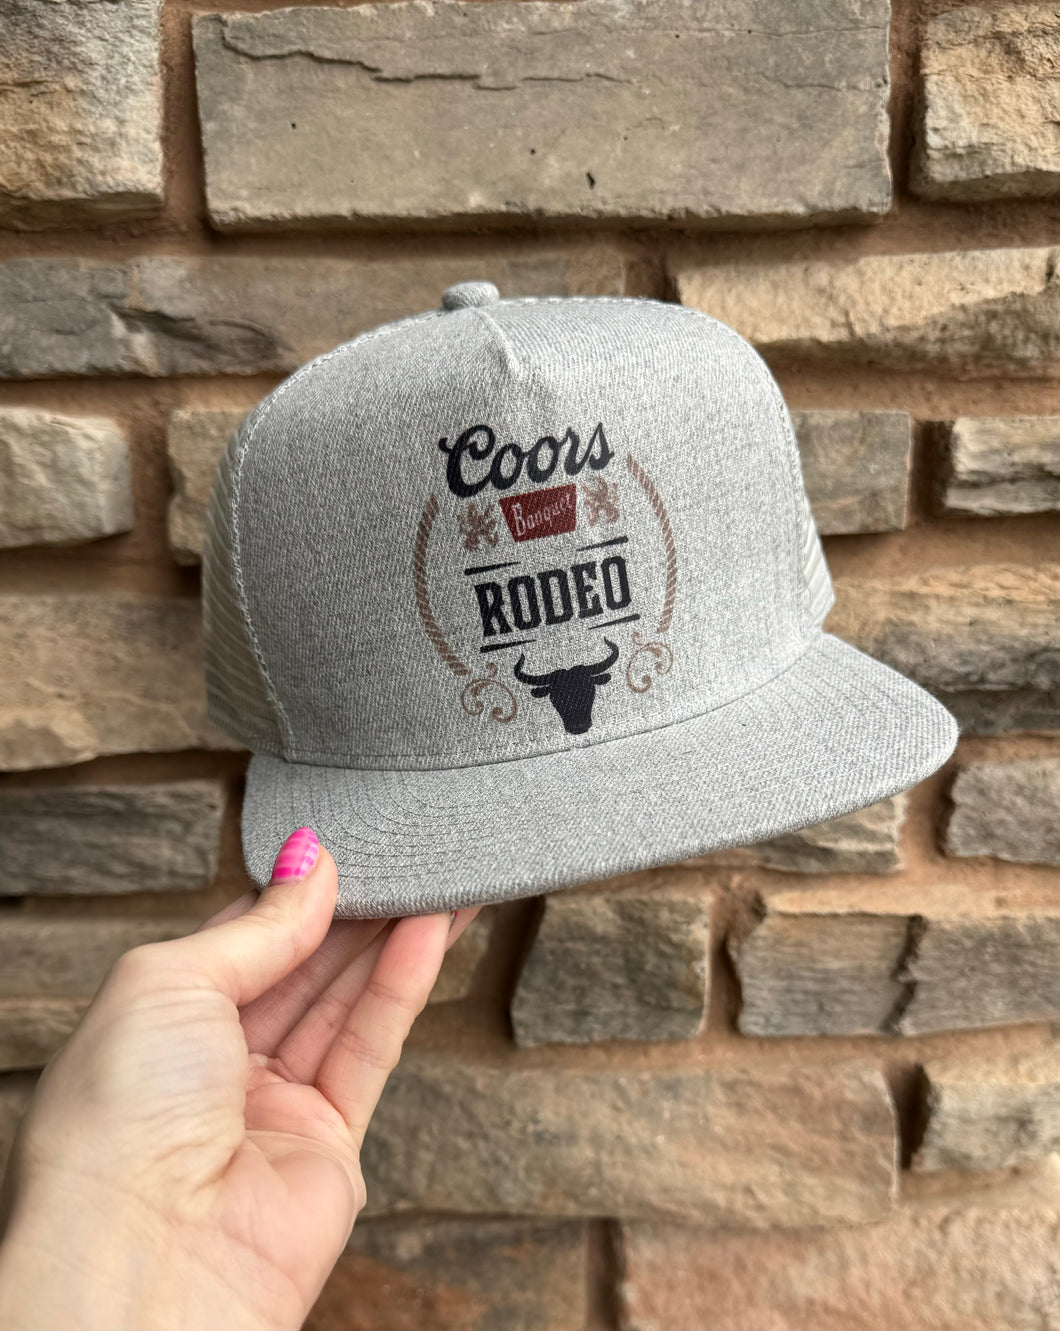 Coors Rodeo Snap Back Hat